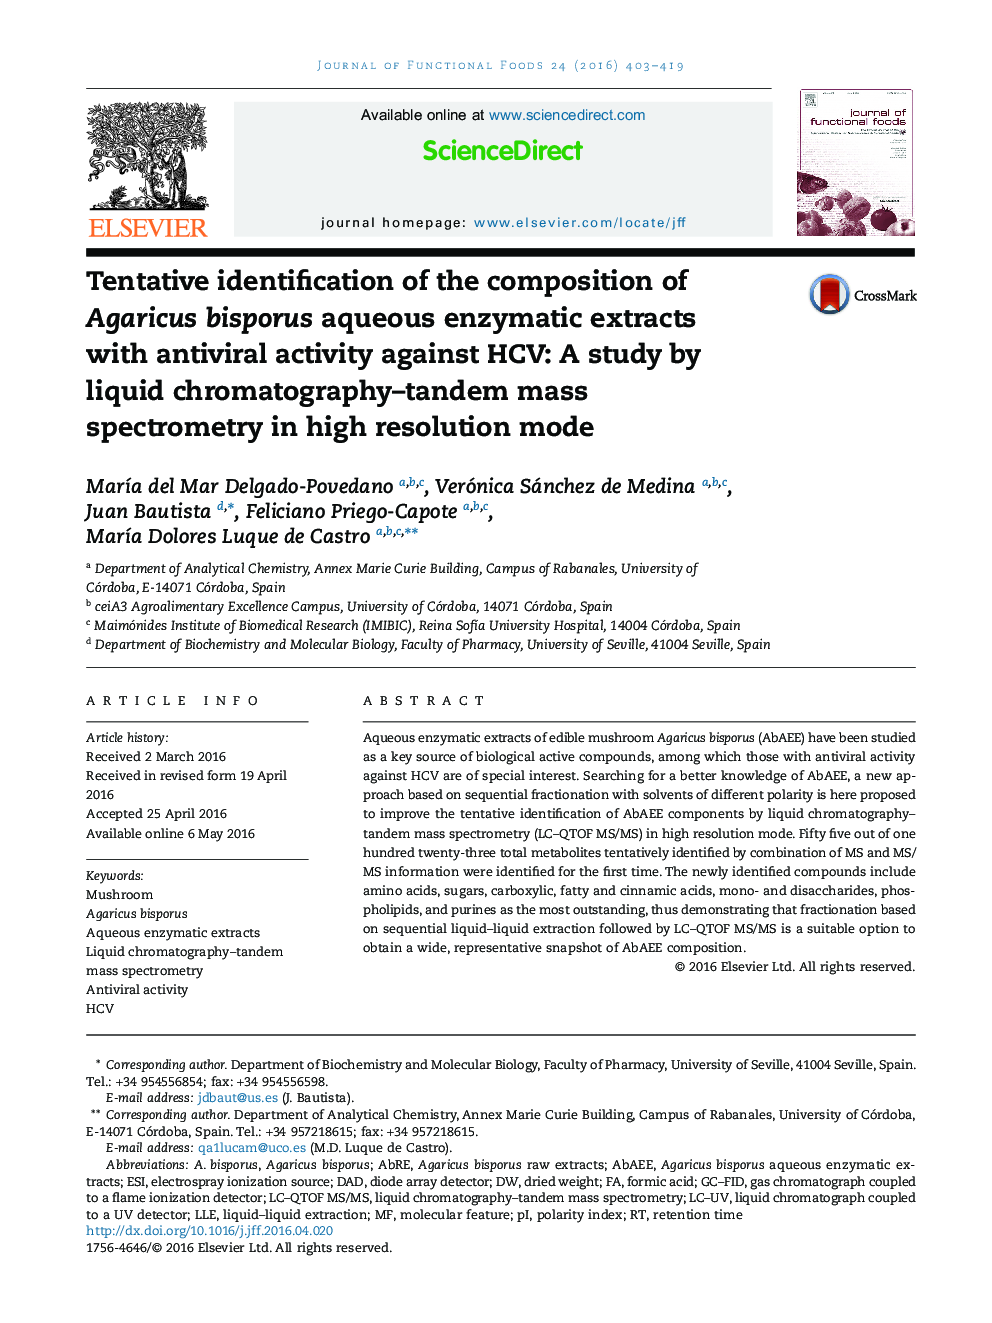 Tentative identification of the composition of Agaricus bisporus aqueous enzymatic extracts with antiviral activity against HCV: A study by liquid chromatography–tandem mass spectrometry in high resolution mode